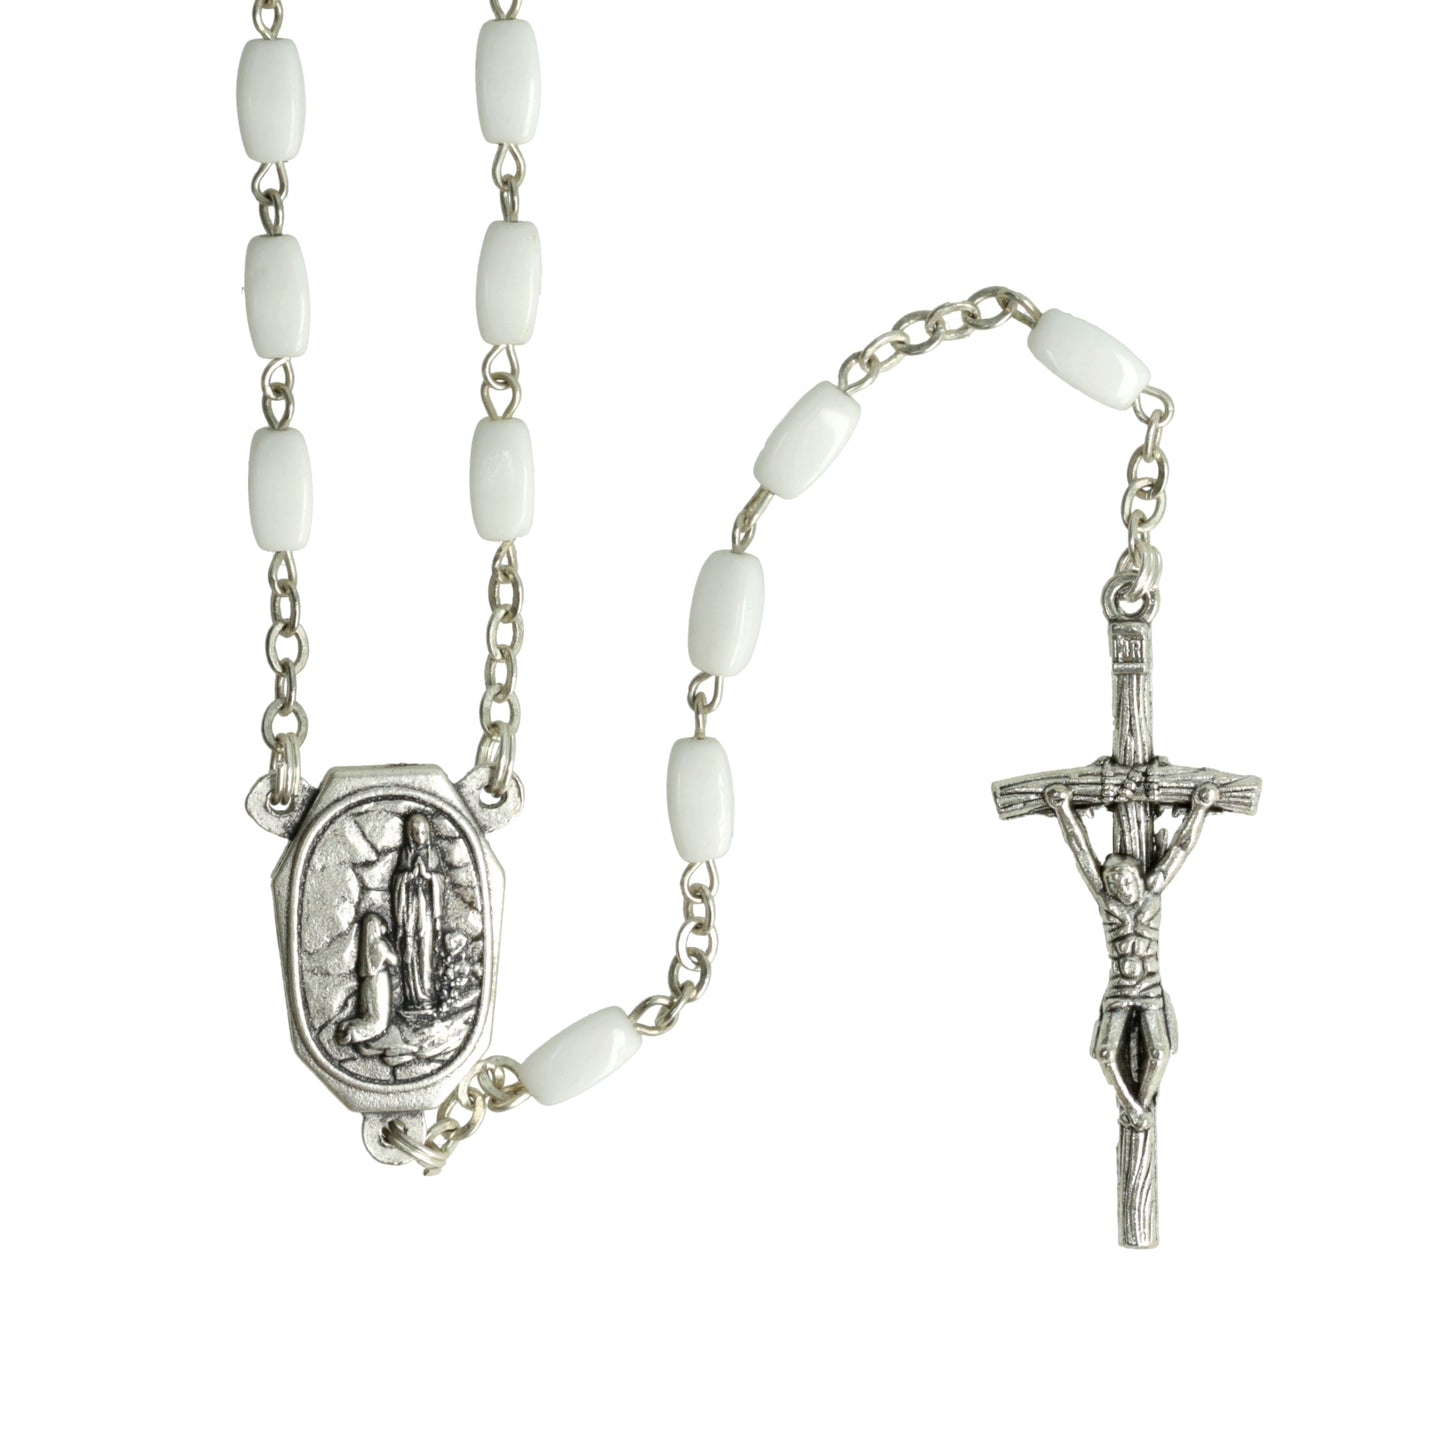 Nacarina Rosary Center Original Lourdes Water Relic. Souvenirs from Italy